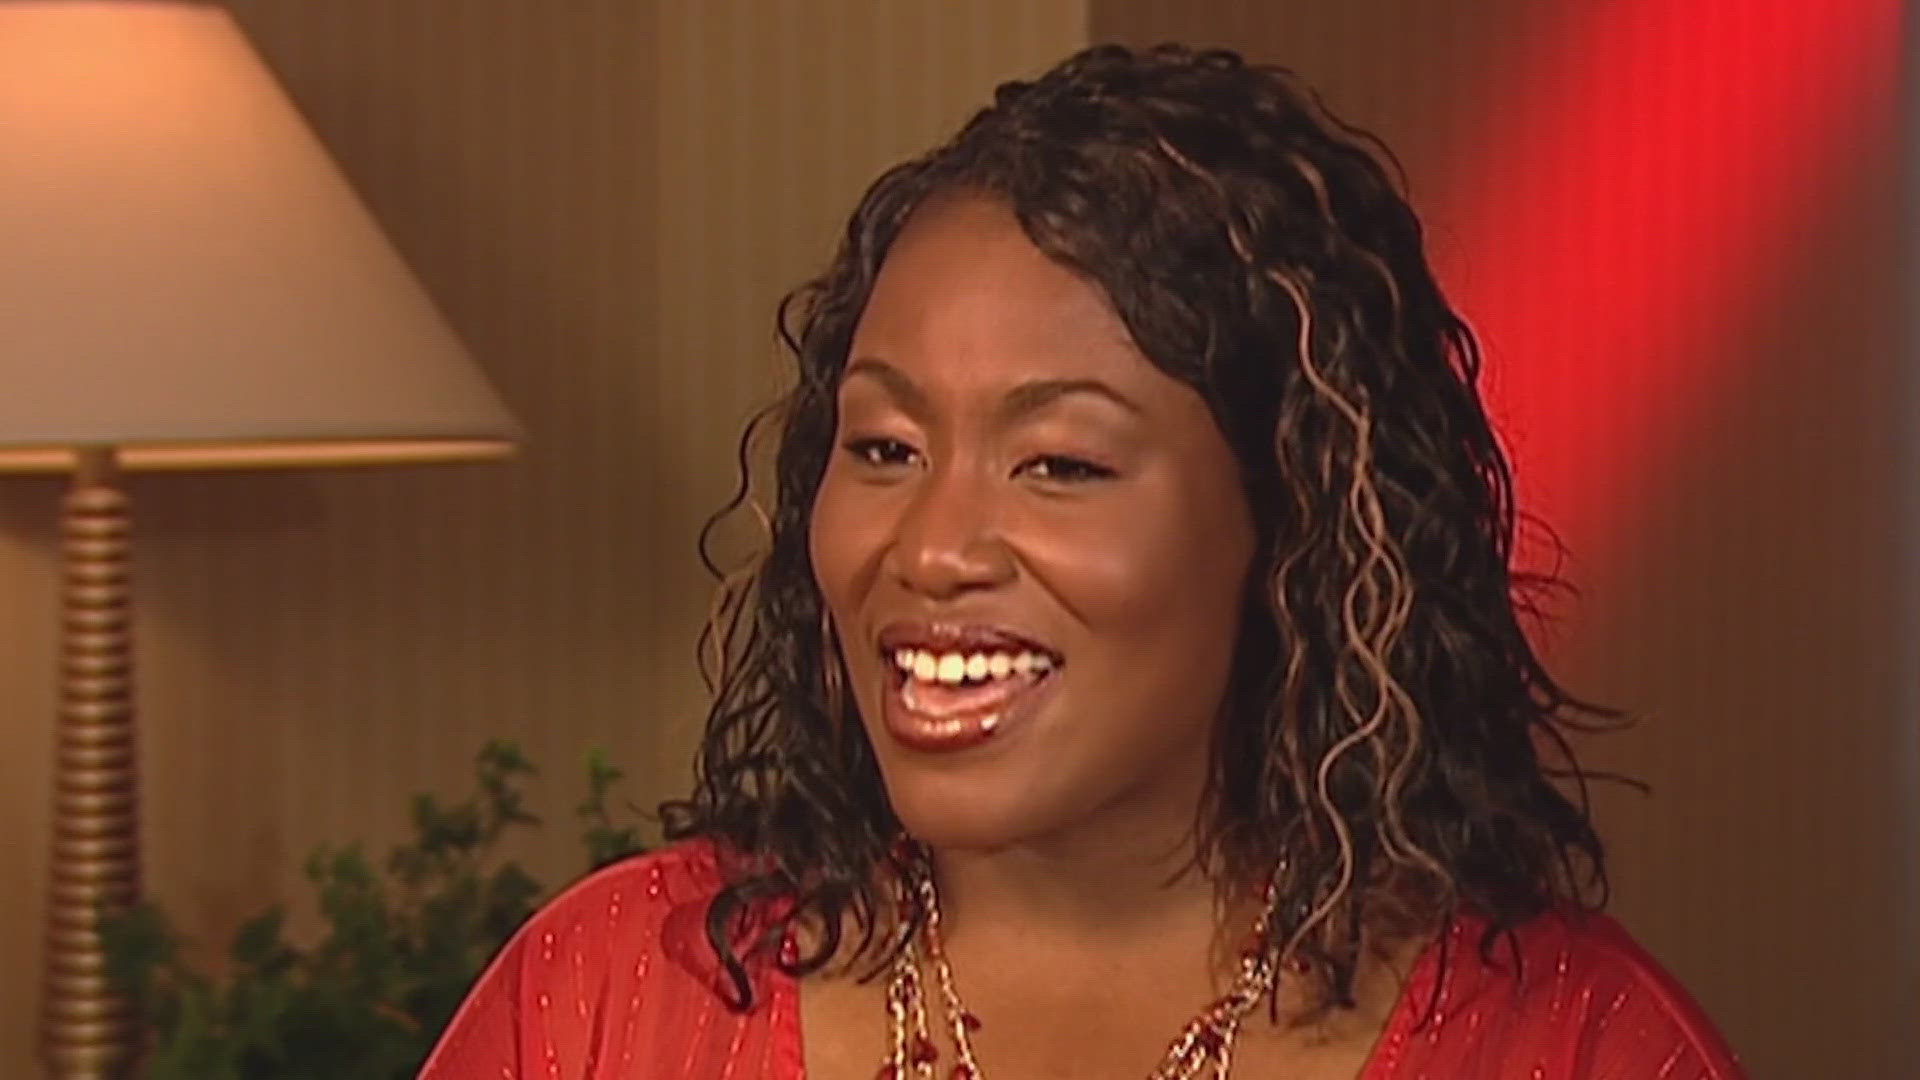 ​Mandisa became a fan favorite for her public kindness on "American Idol," responding with forgiveness to judge Simon Cowell's comments about her weight.